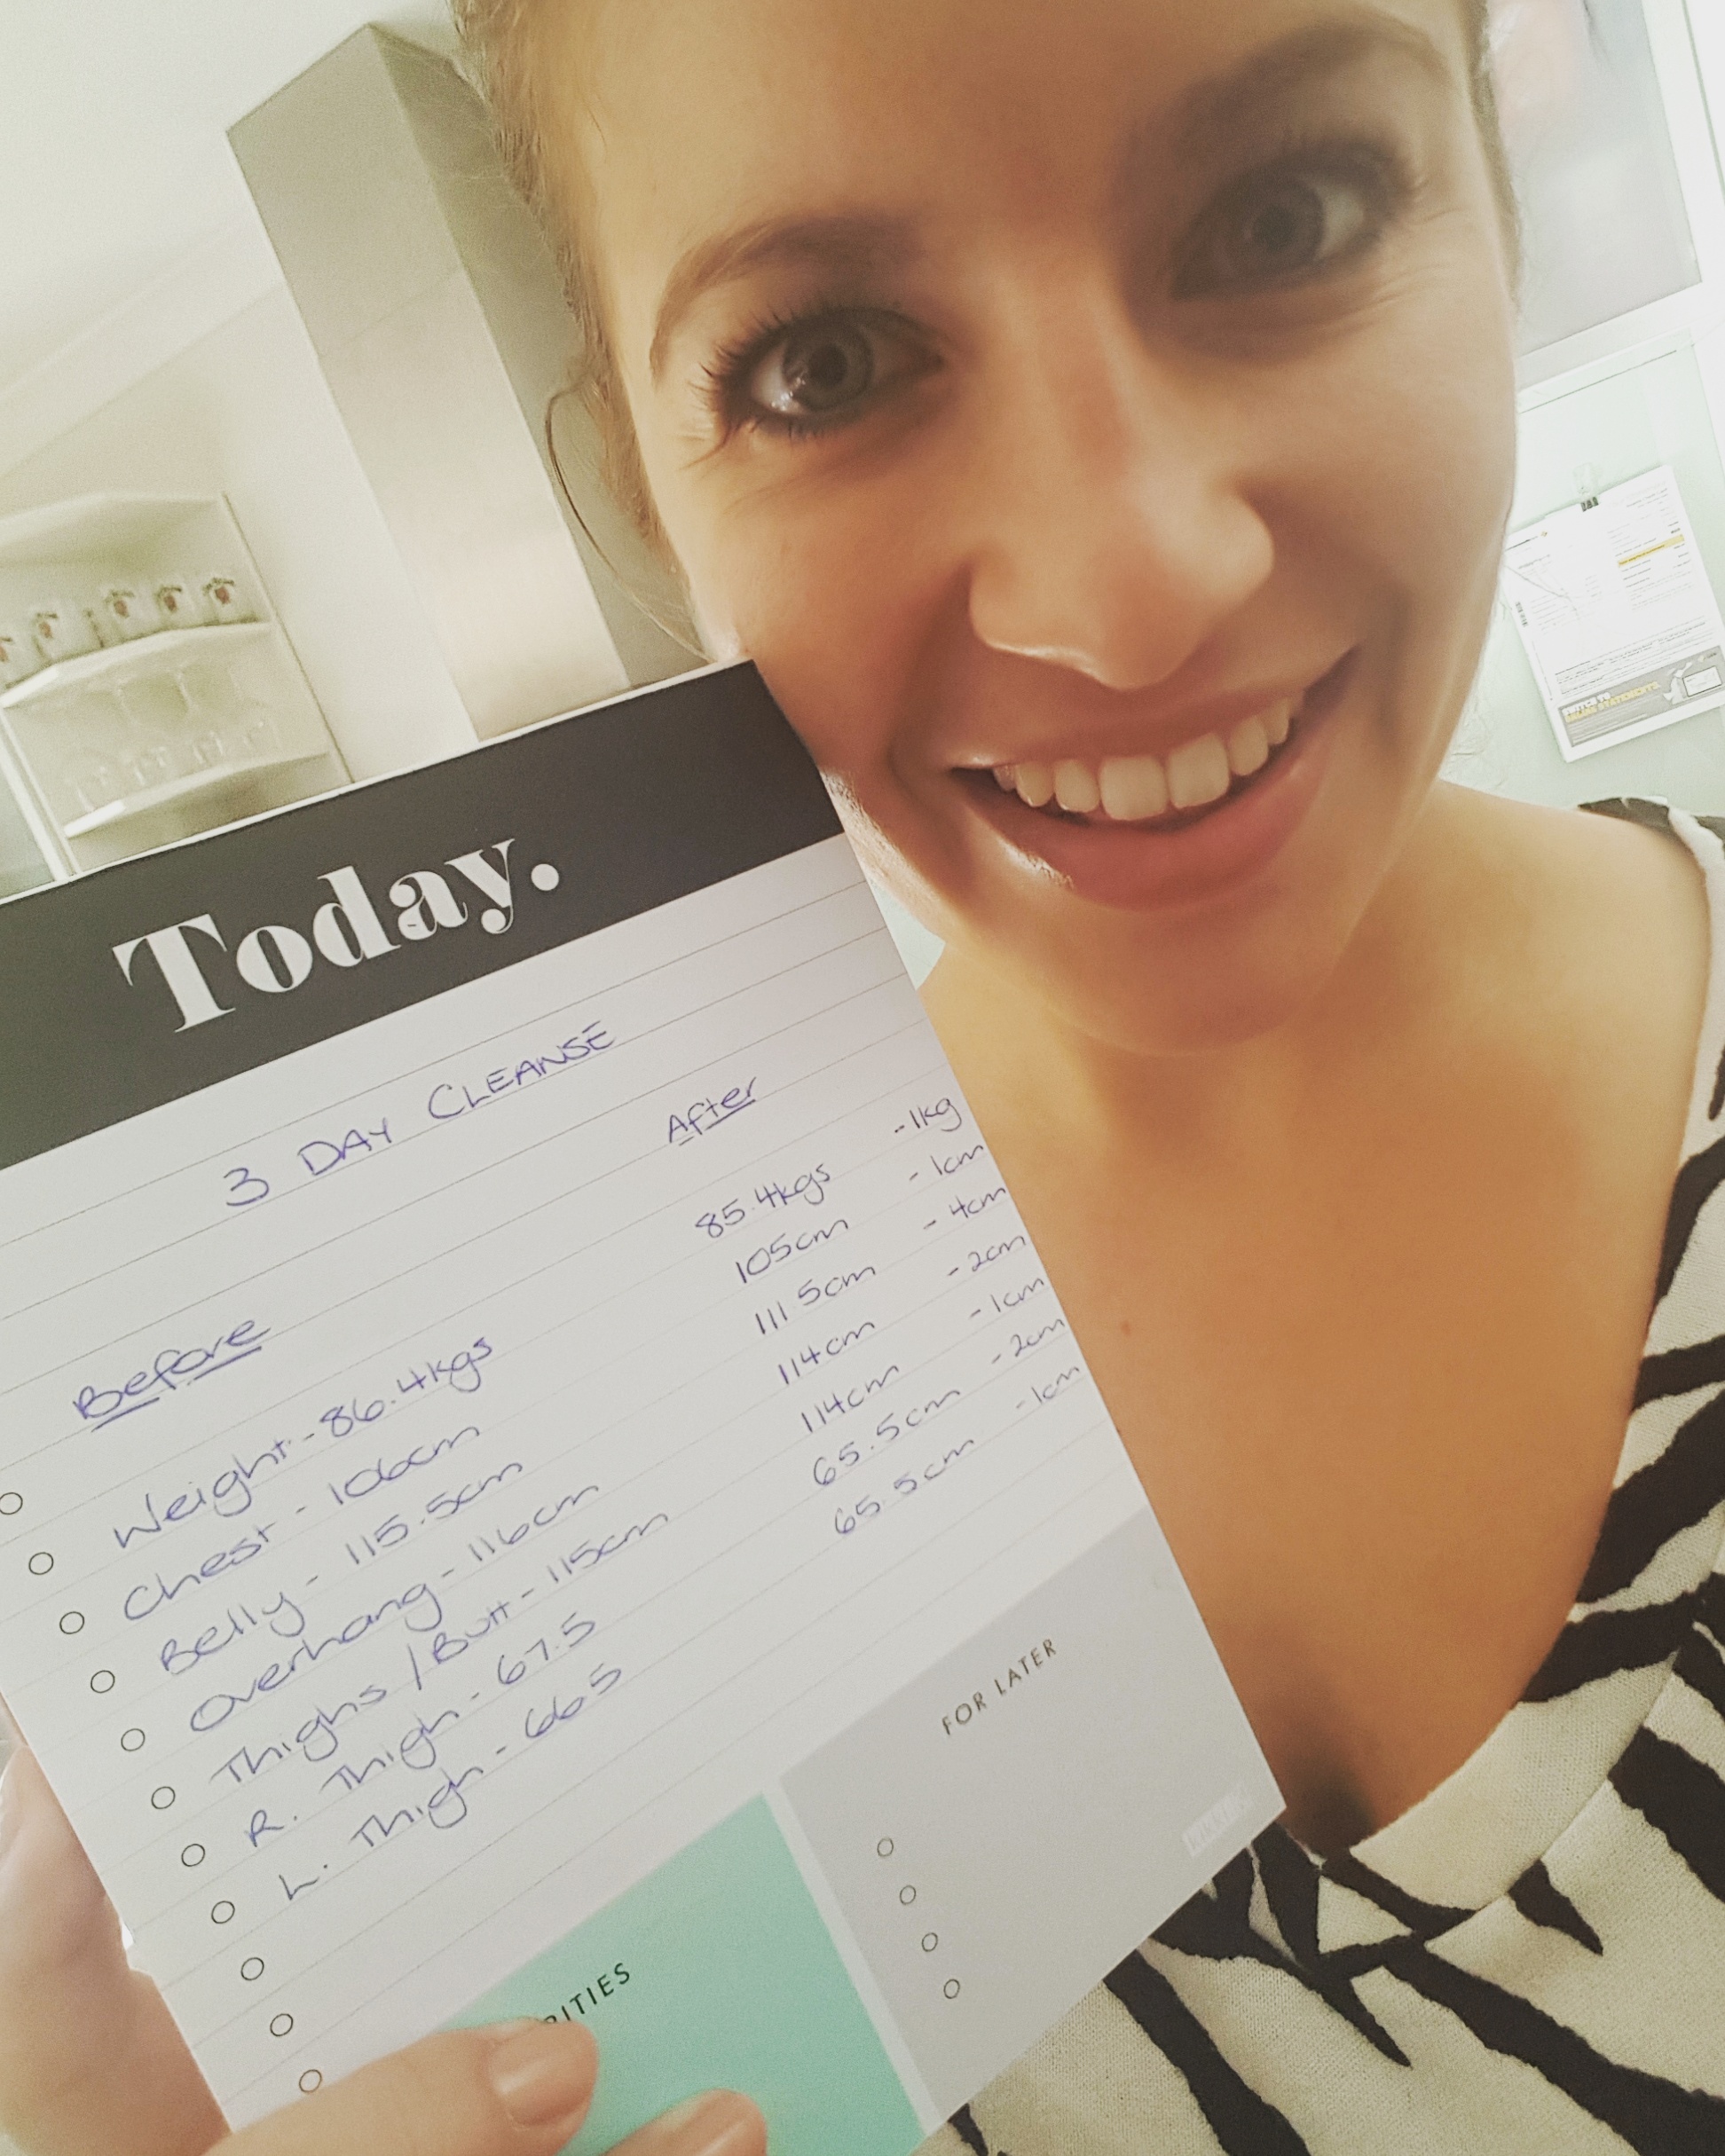 'In Just 3 Days I Lost 1kg And 11cm Off My Body': New Mum's Incredible 3 Day Cleanse Results! 